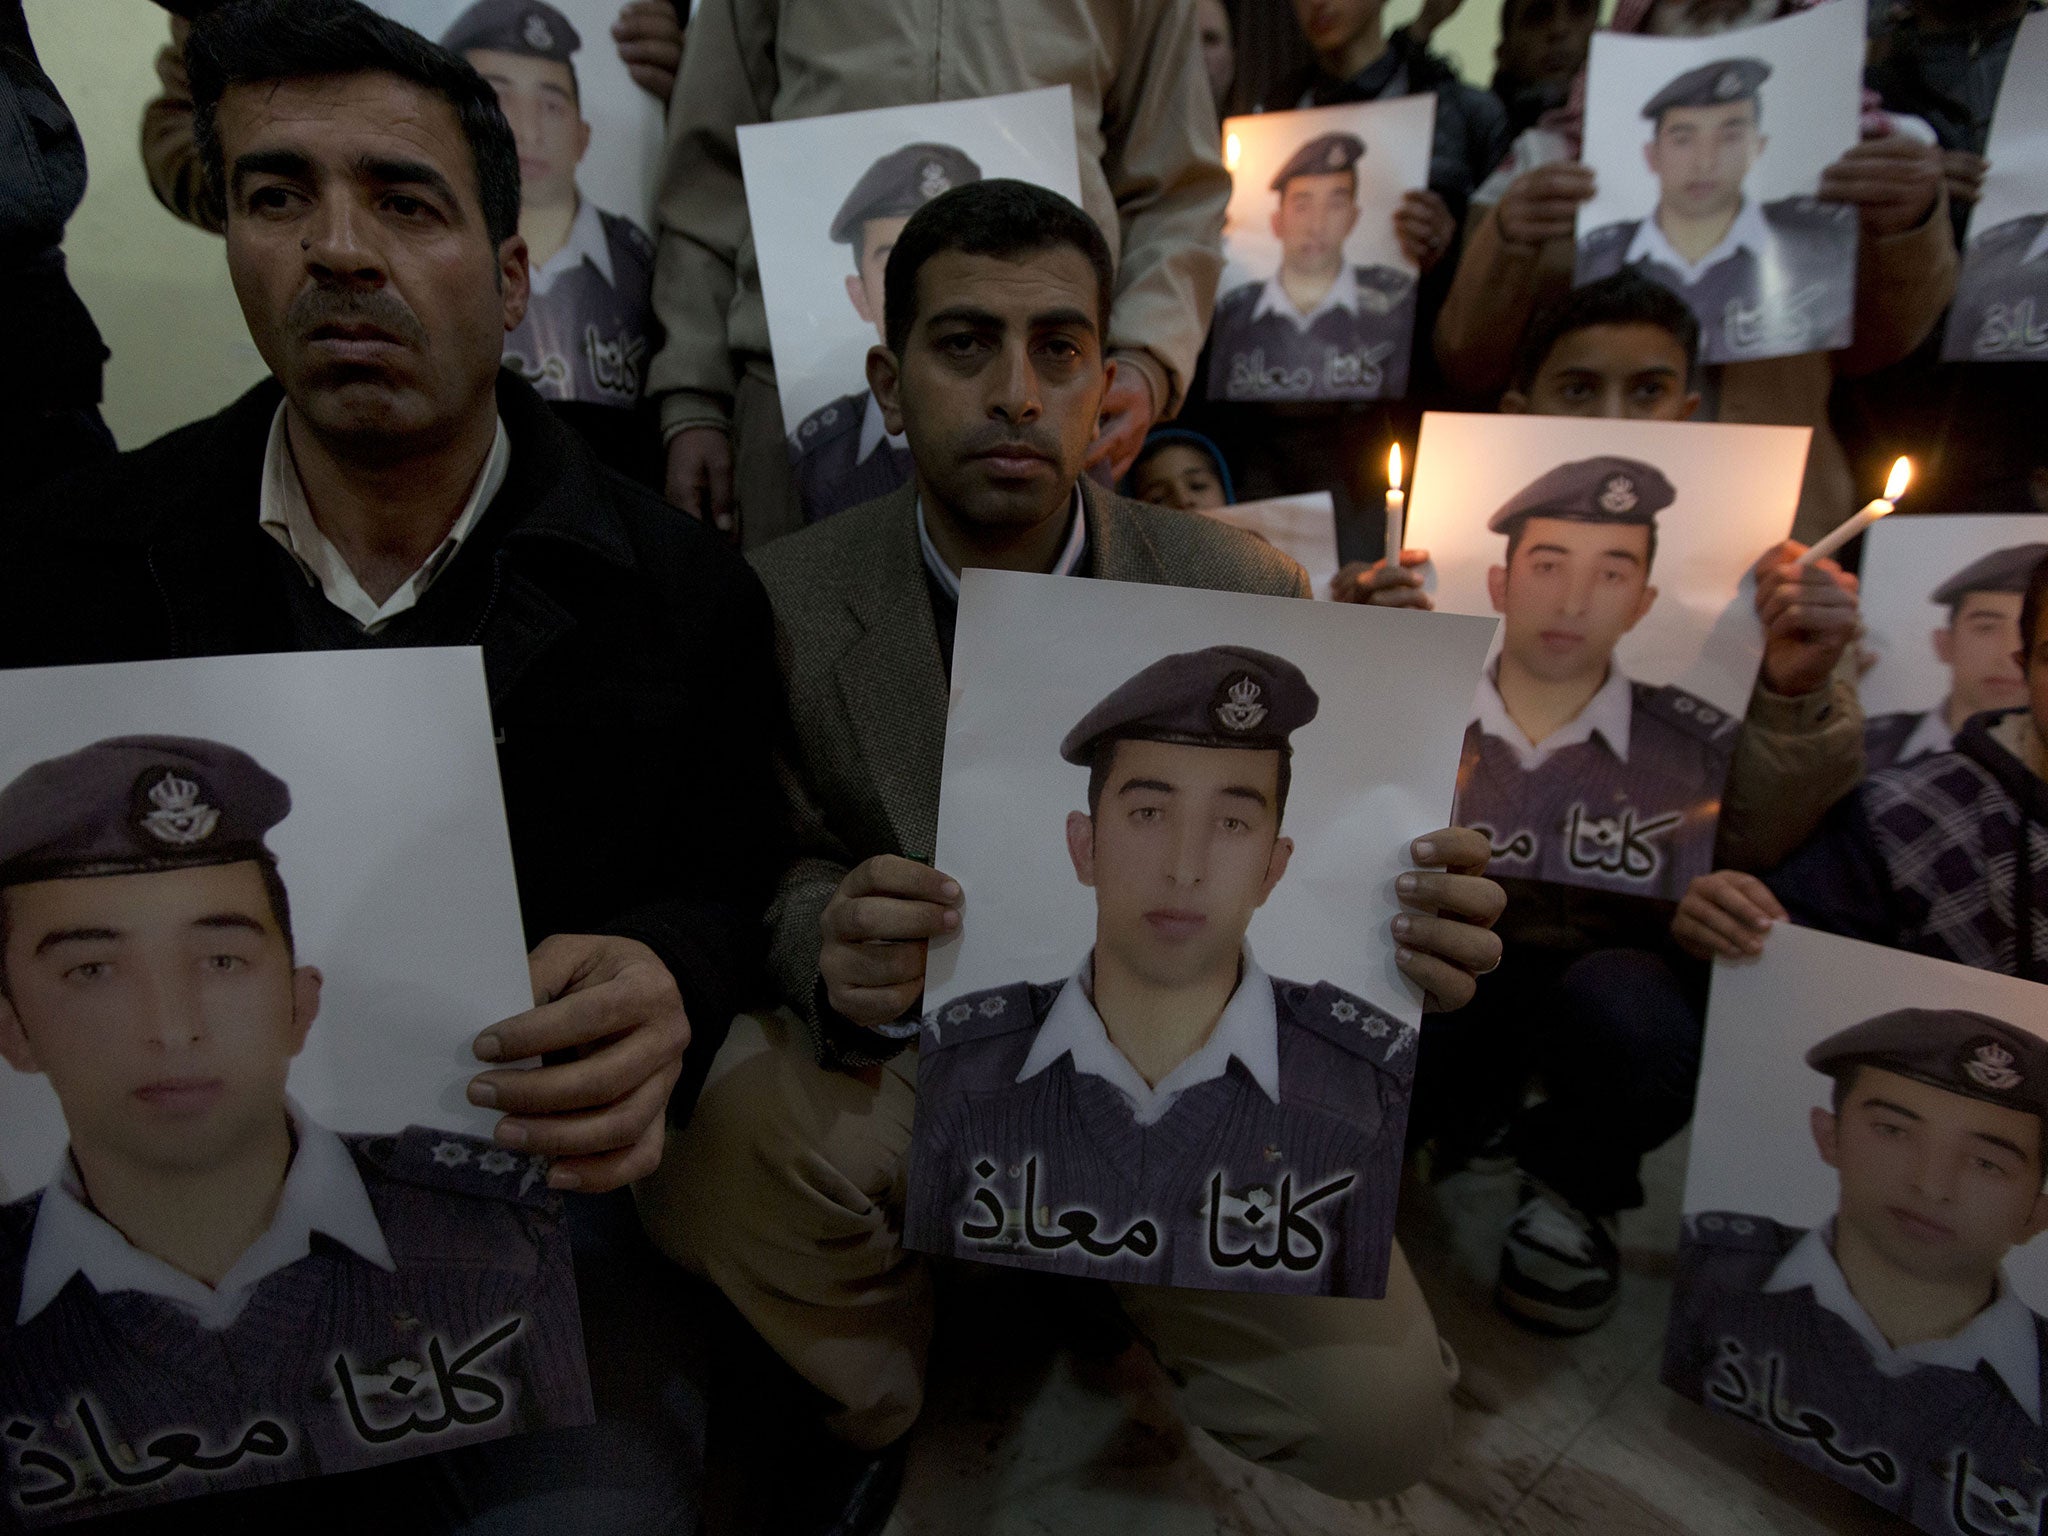 Jawdat Al-Kaseasbeh, brother of Jordanian pilot, Lt Muath al-Kaseasbeh, carries a poster and message that reads "we are all Muath"